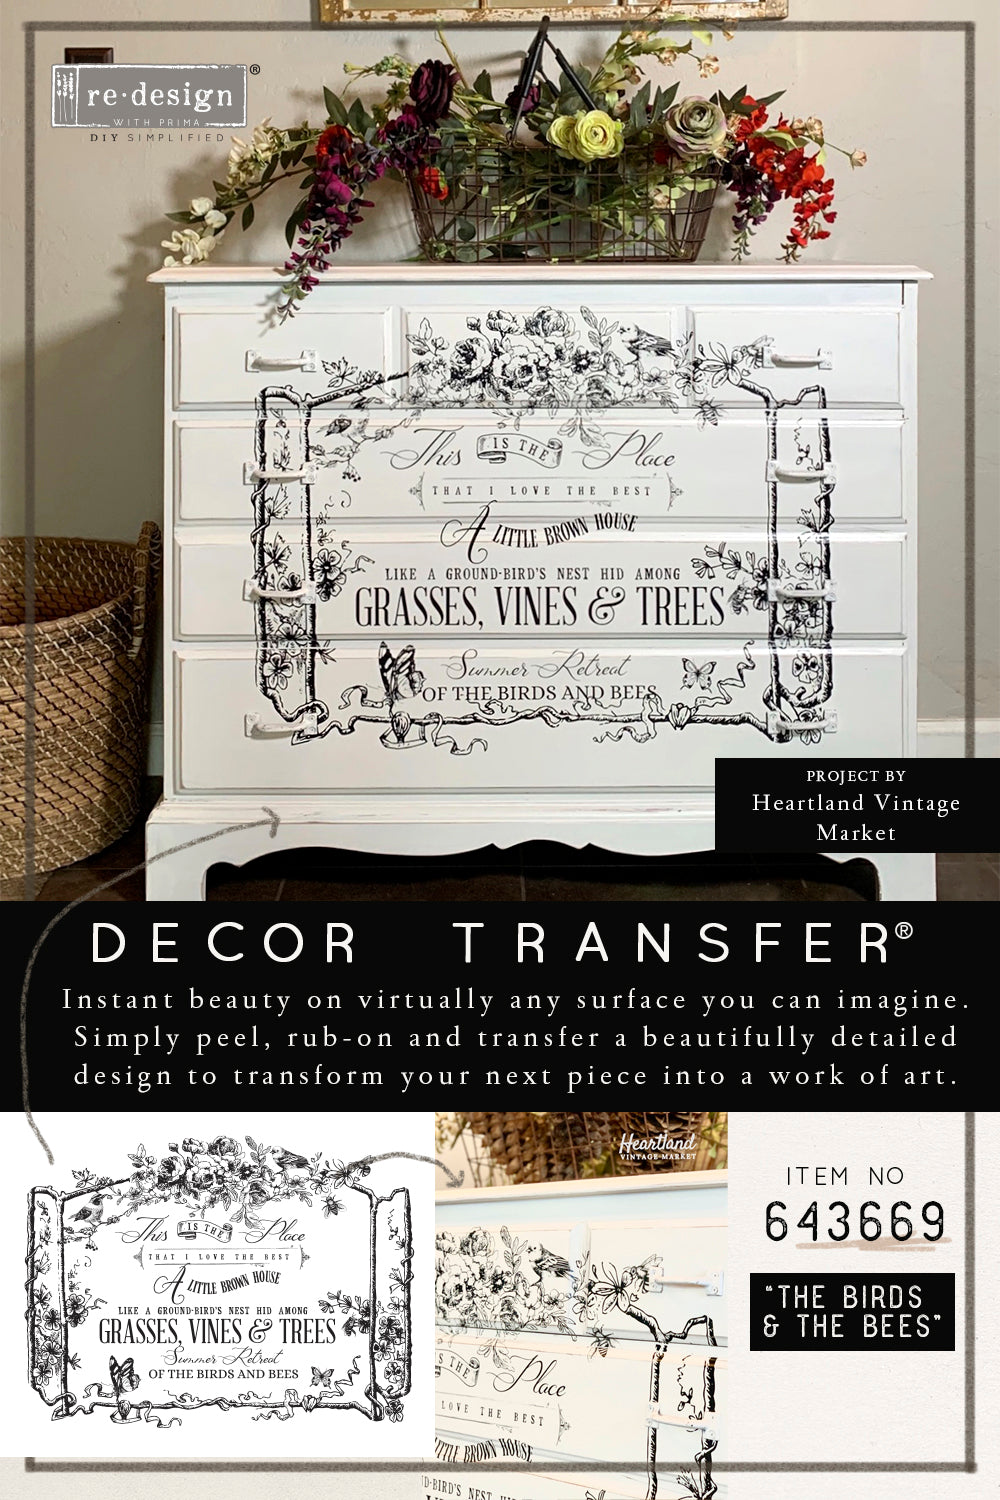 Redesign Decor Transfer - The Birds & The Bees